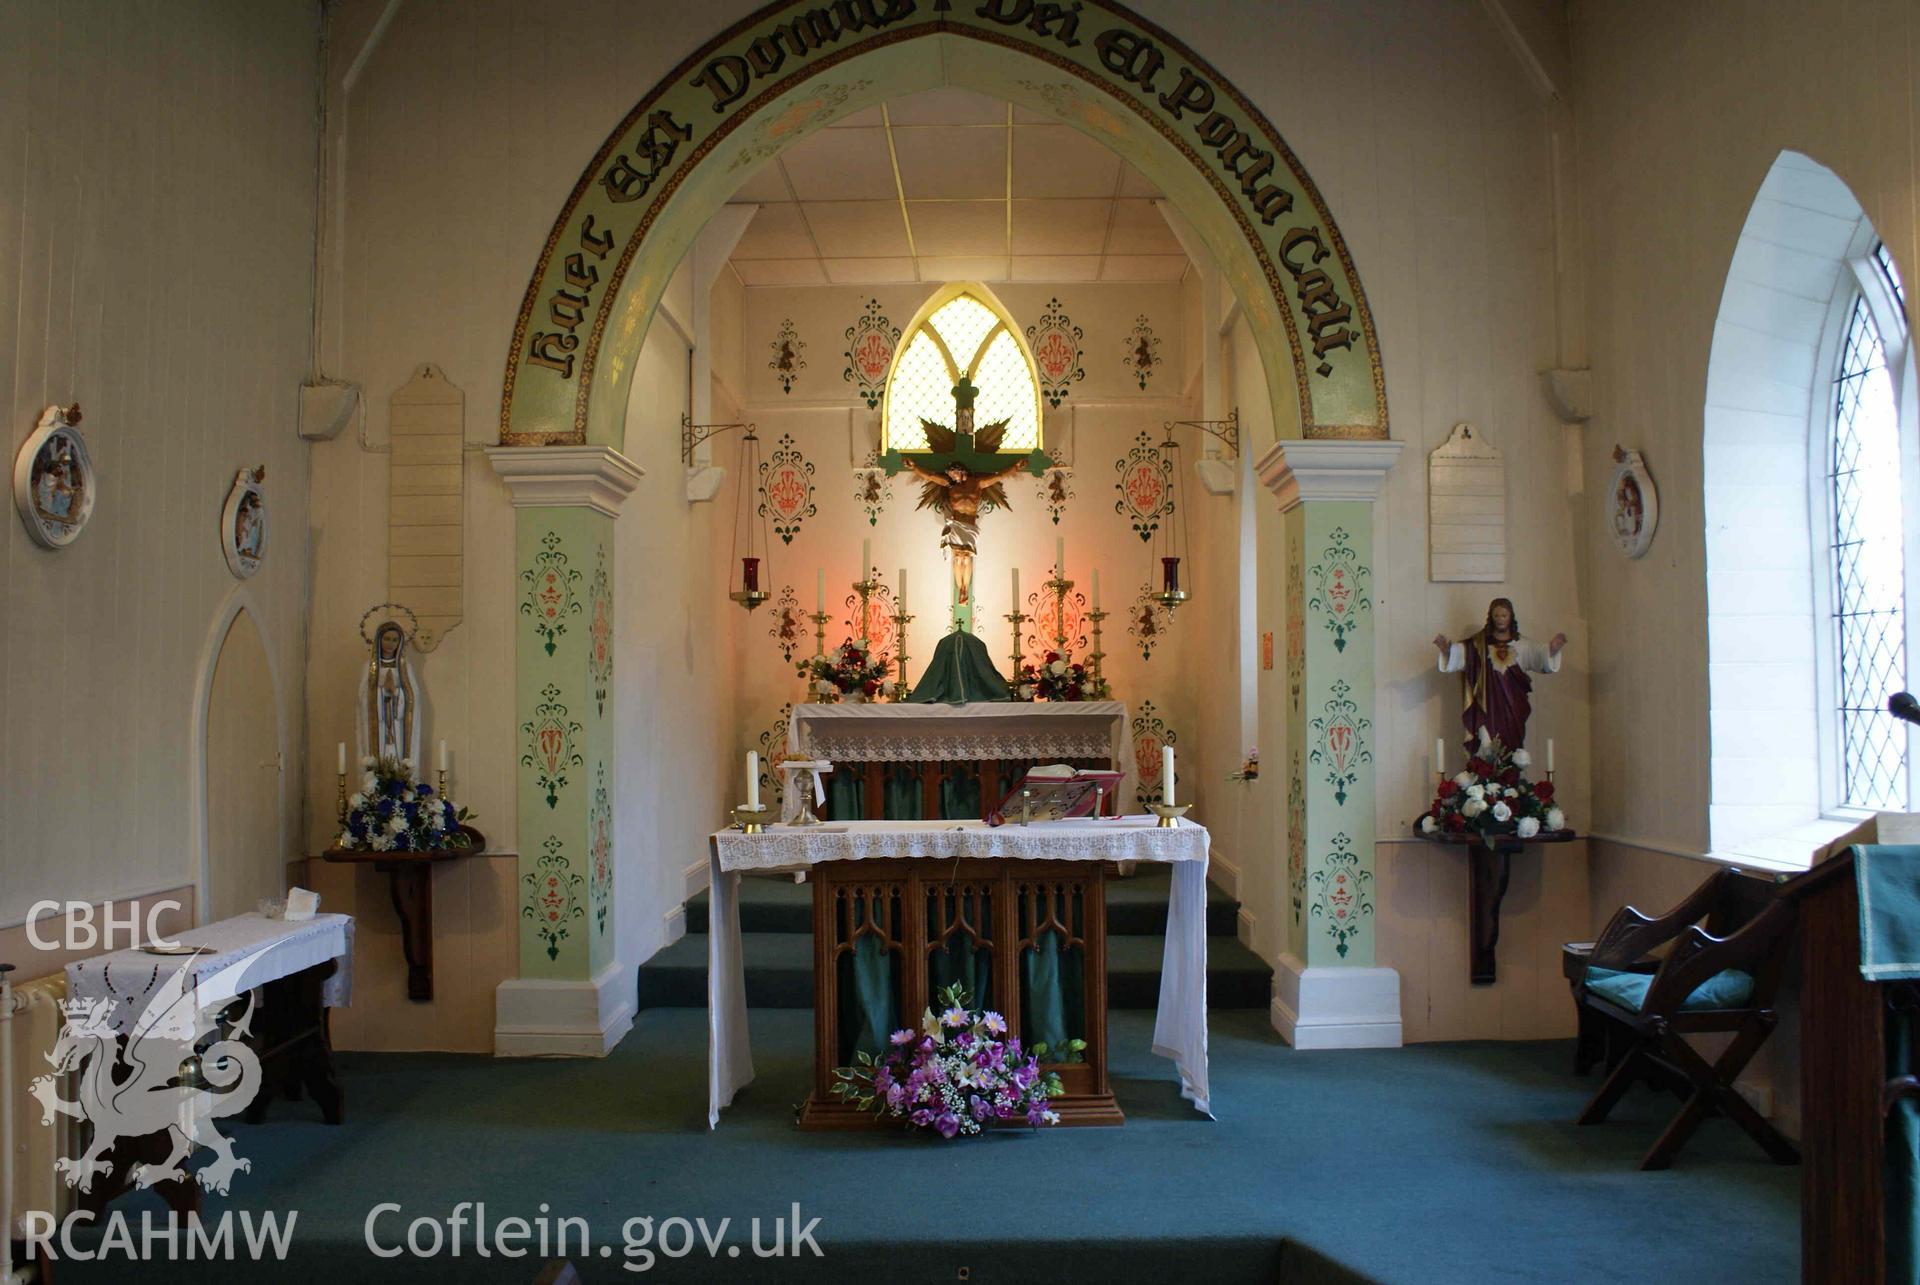 Digital colour photograph showing the altar at St Mary's Catholic church, Abertillery.